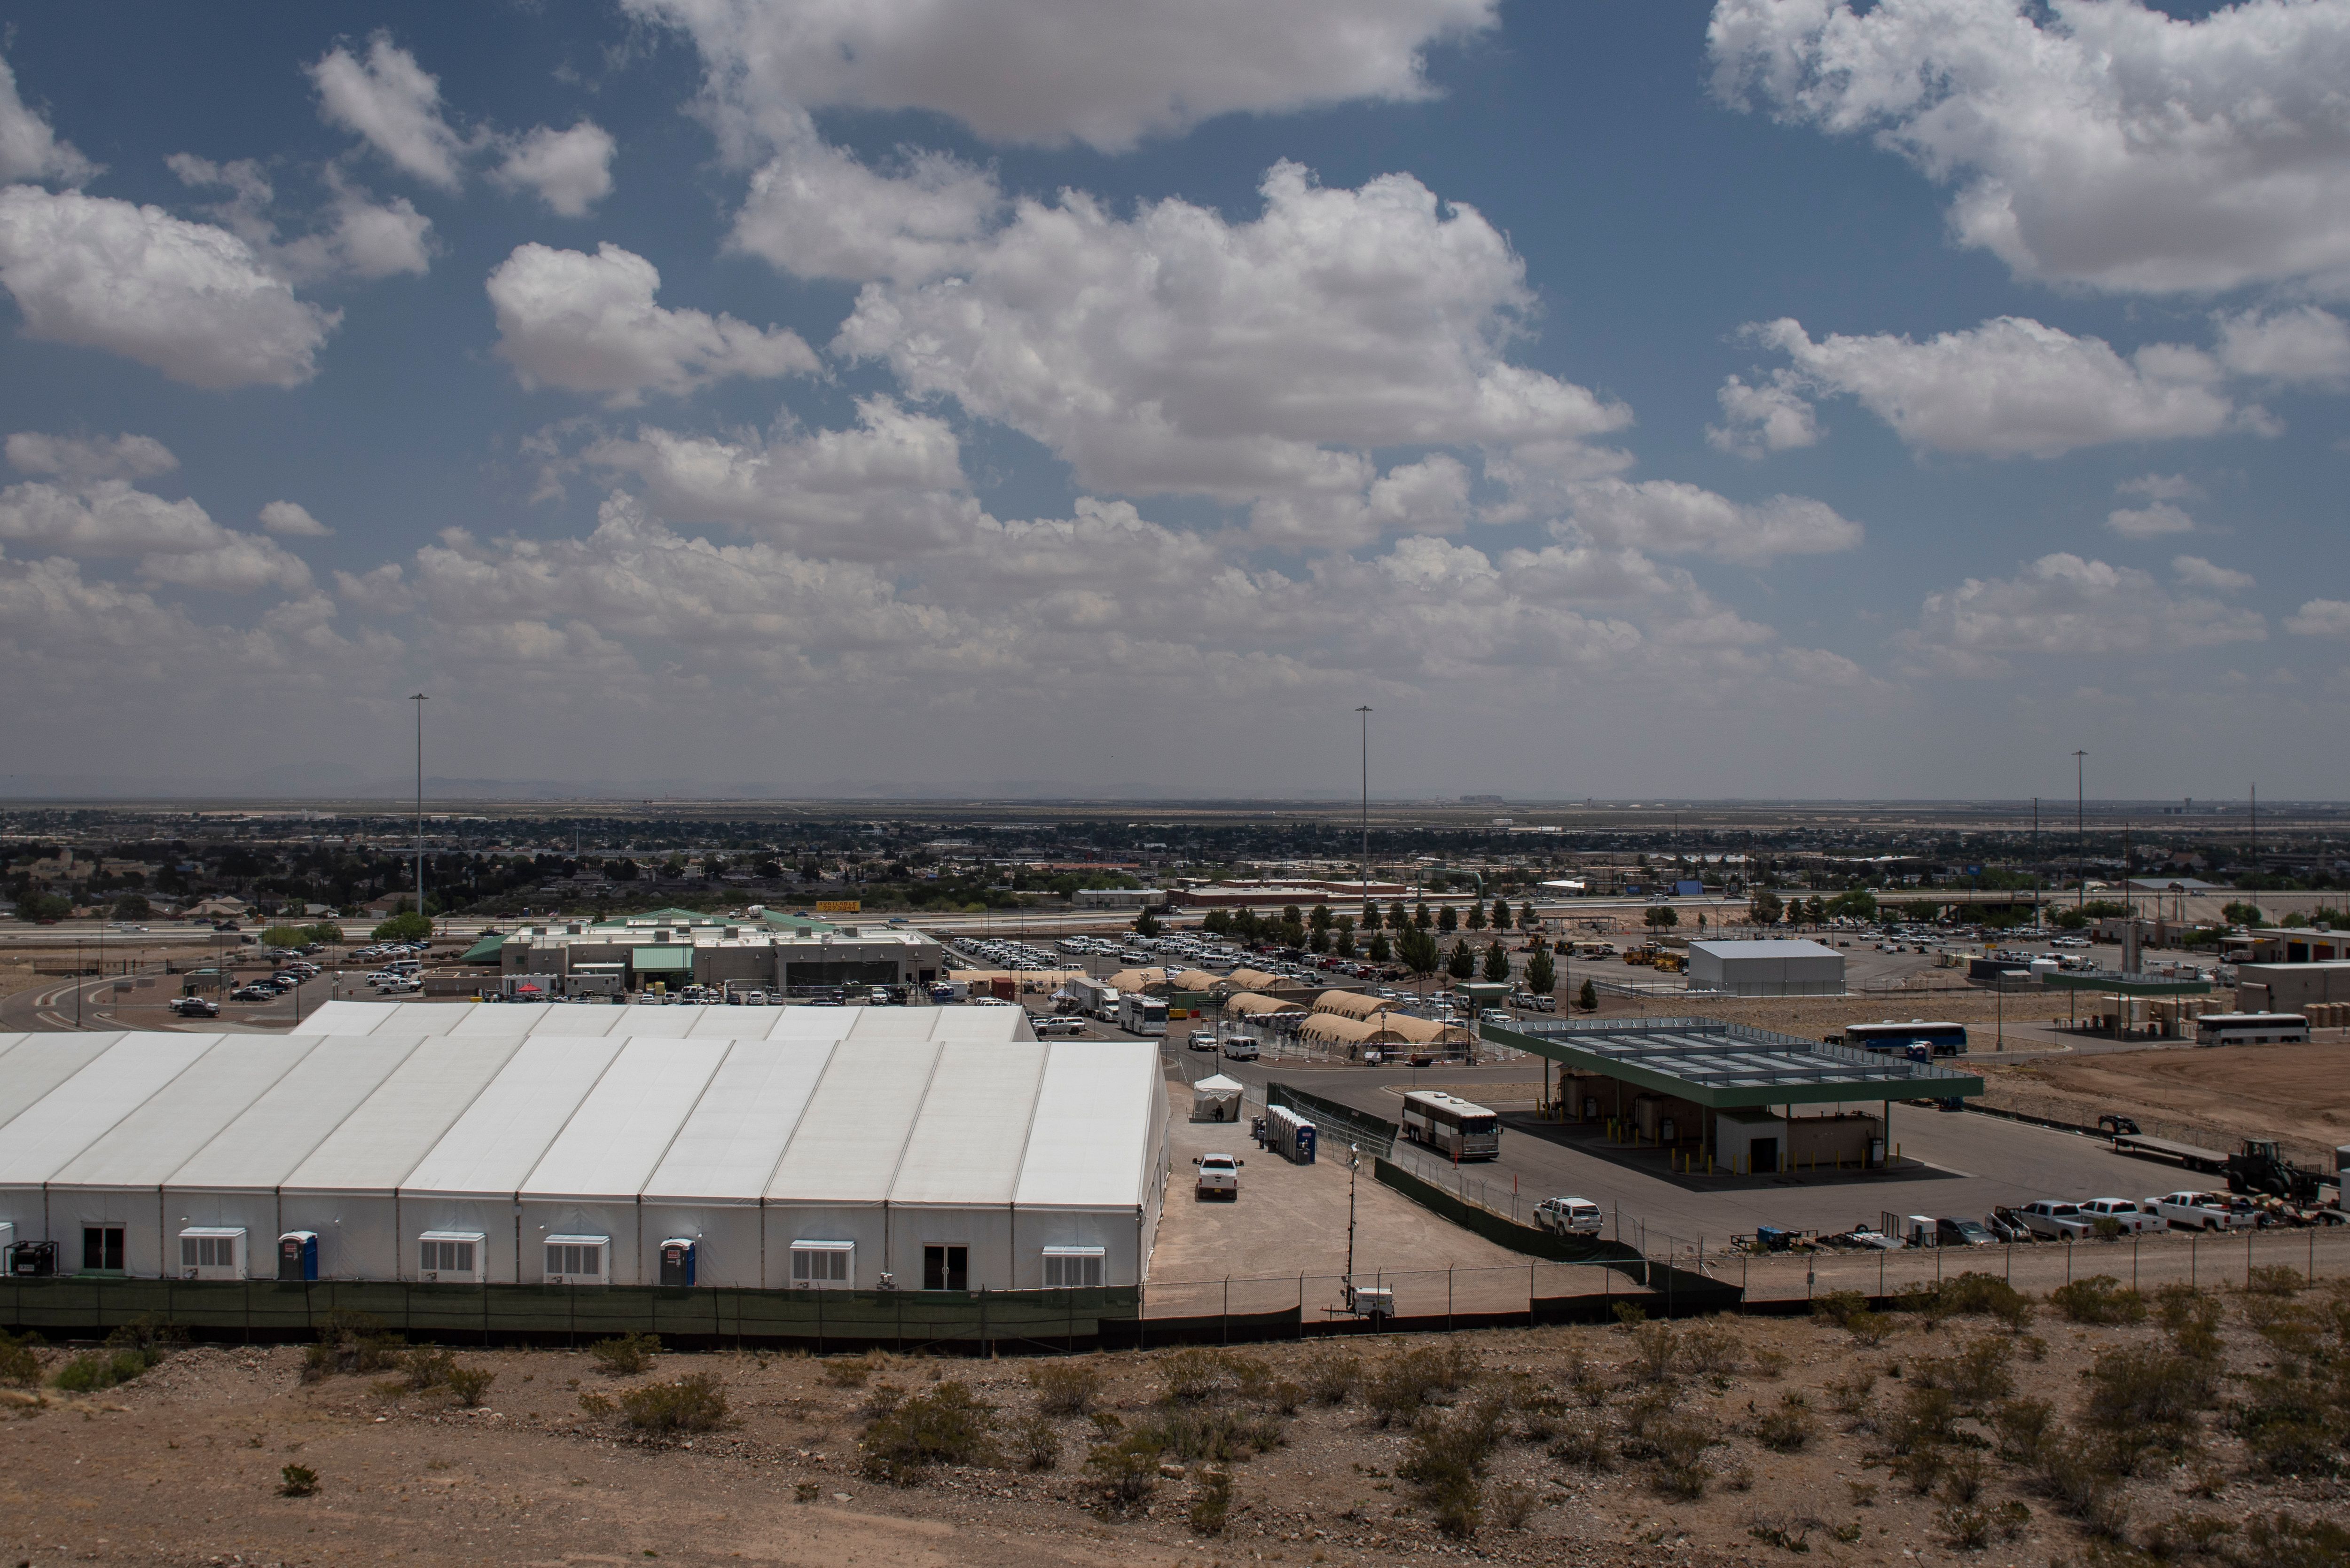 Holding facility for migrants in El Paso.